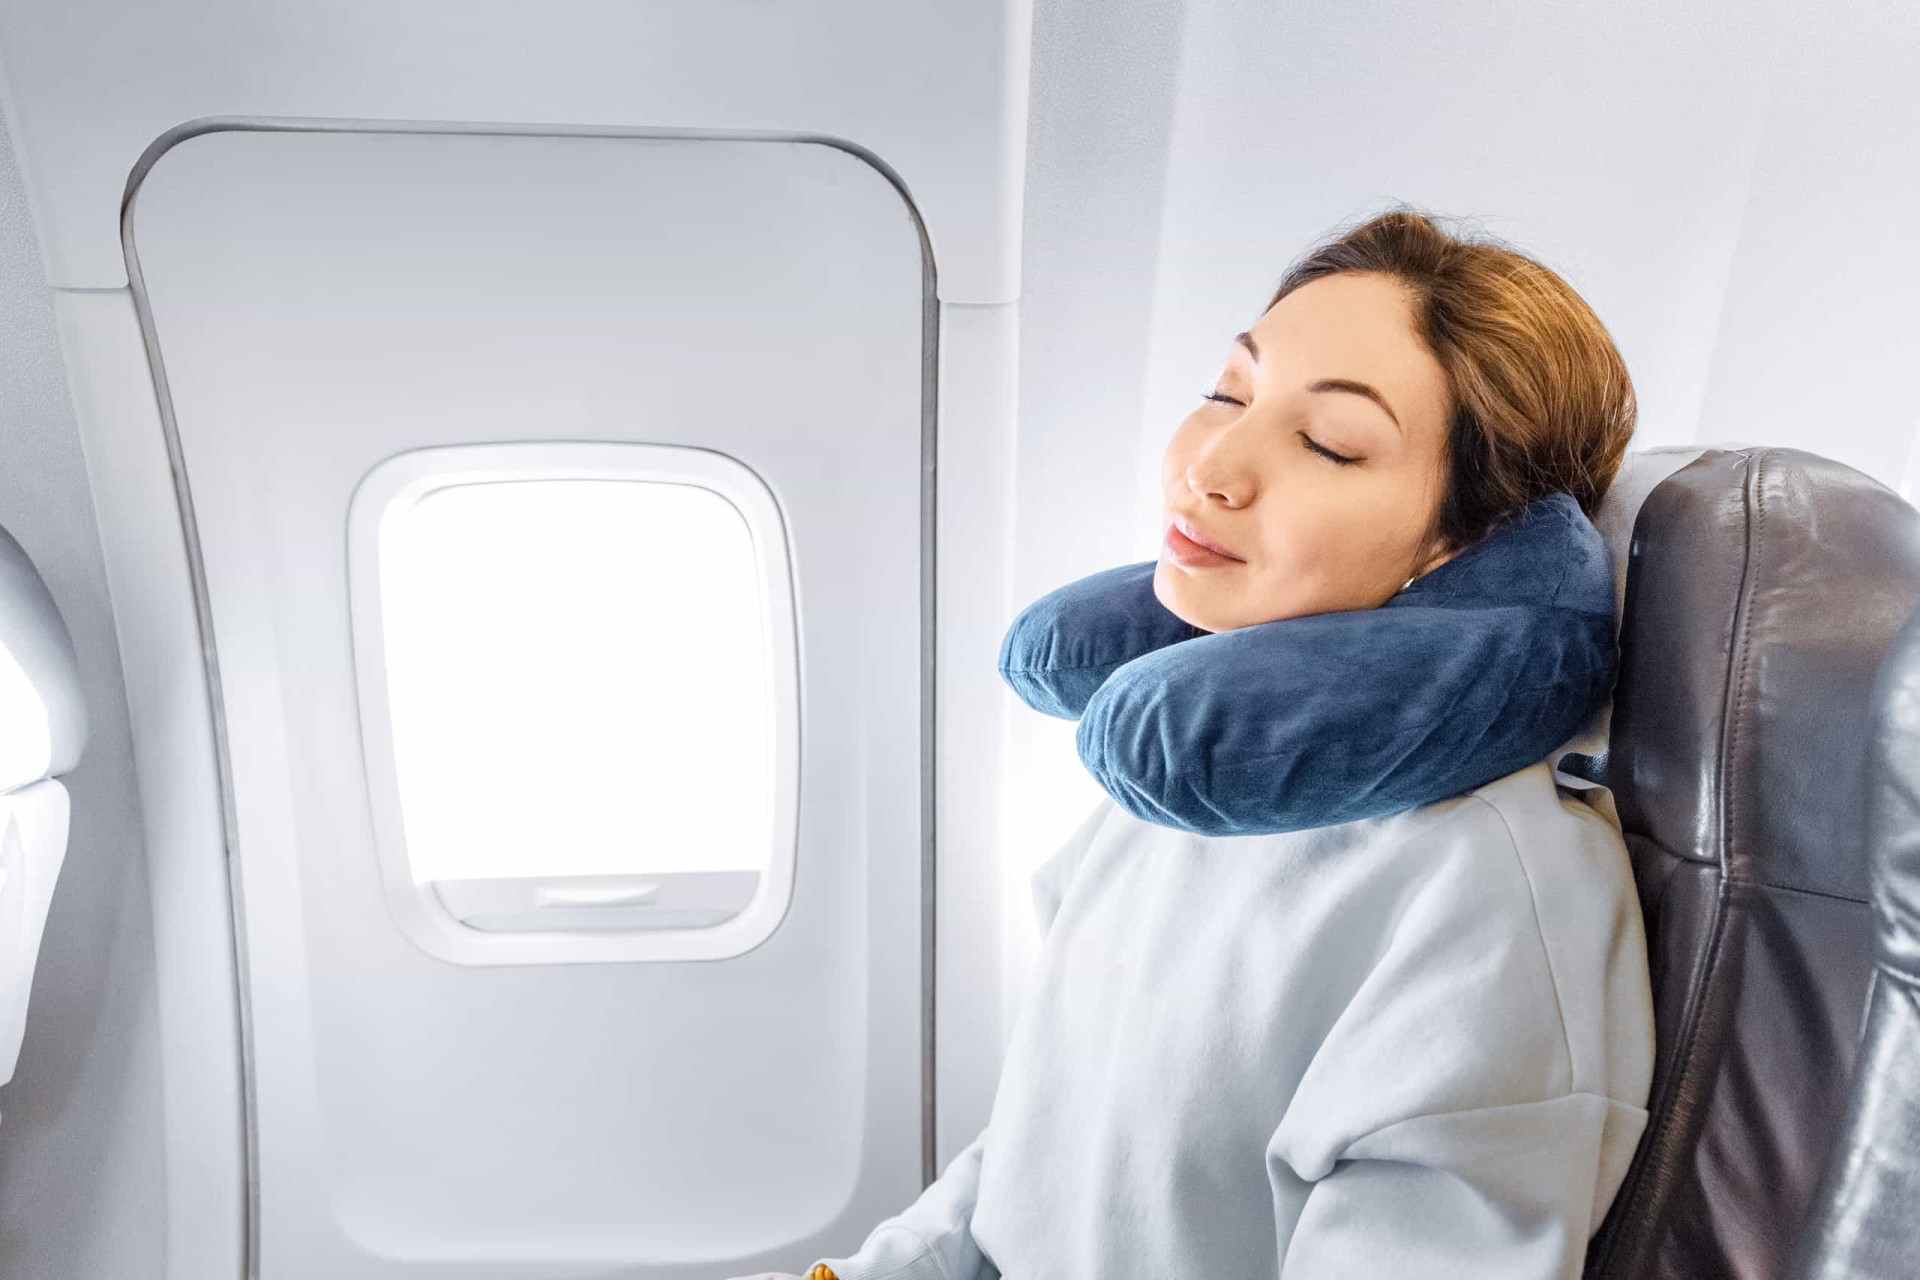 <p>A small pillow is a must-have carry-on item for long-distance travelers. You can find them at almost every airport, and it's a small price to pay for not destroying your neck.</p><p>You may also like:<a href="https://www.starsinsider.com/n/190447?utm_source=msn.com&utm_medium=display&utm_campaign=referral_description&utm_content=500296v1en-us"> Regrets? The actors who turned down roles in successful movies</a></p>